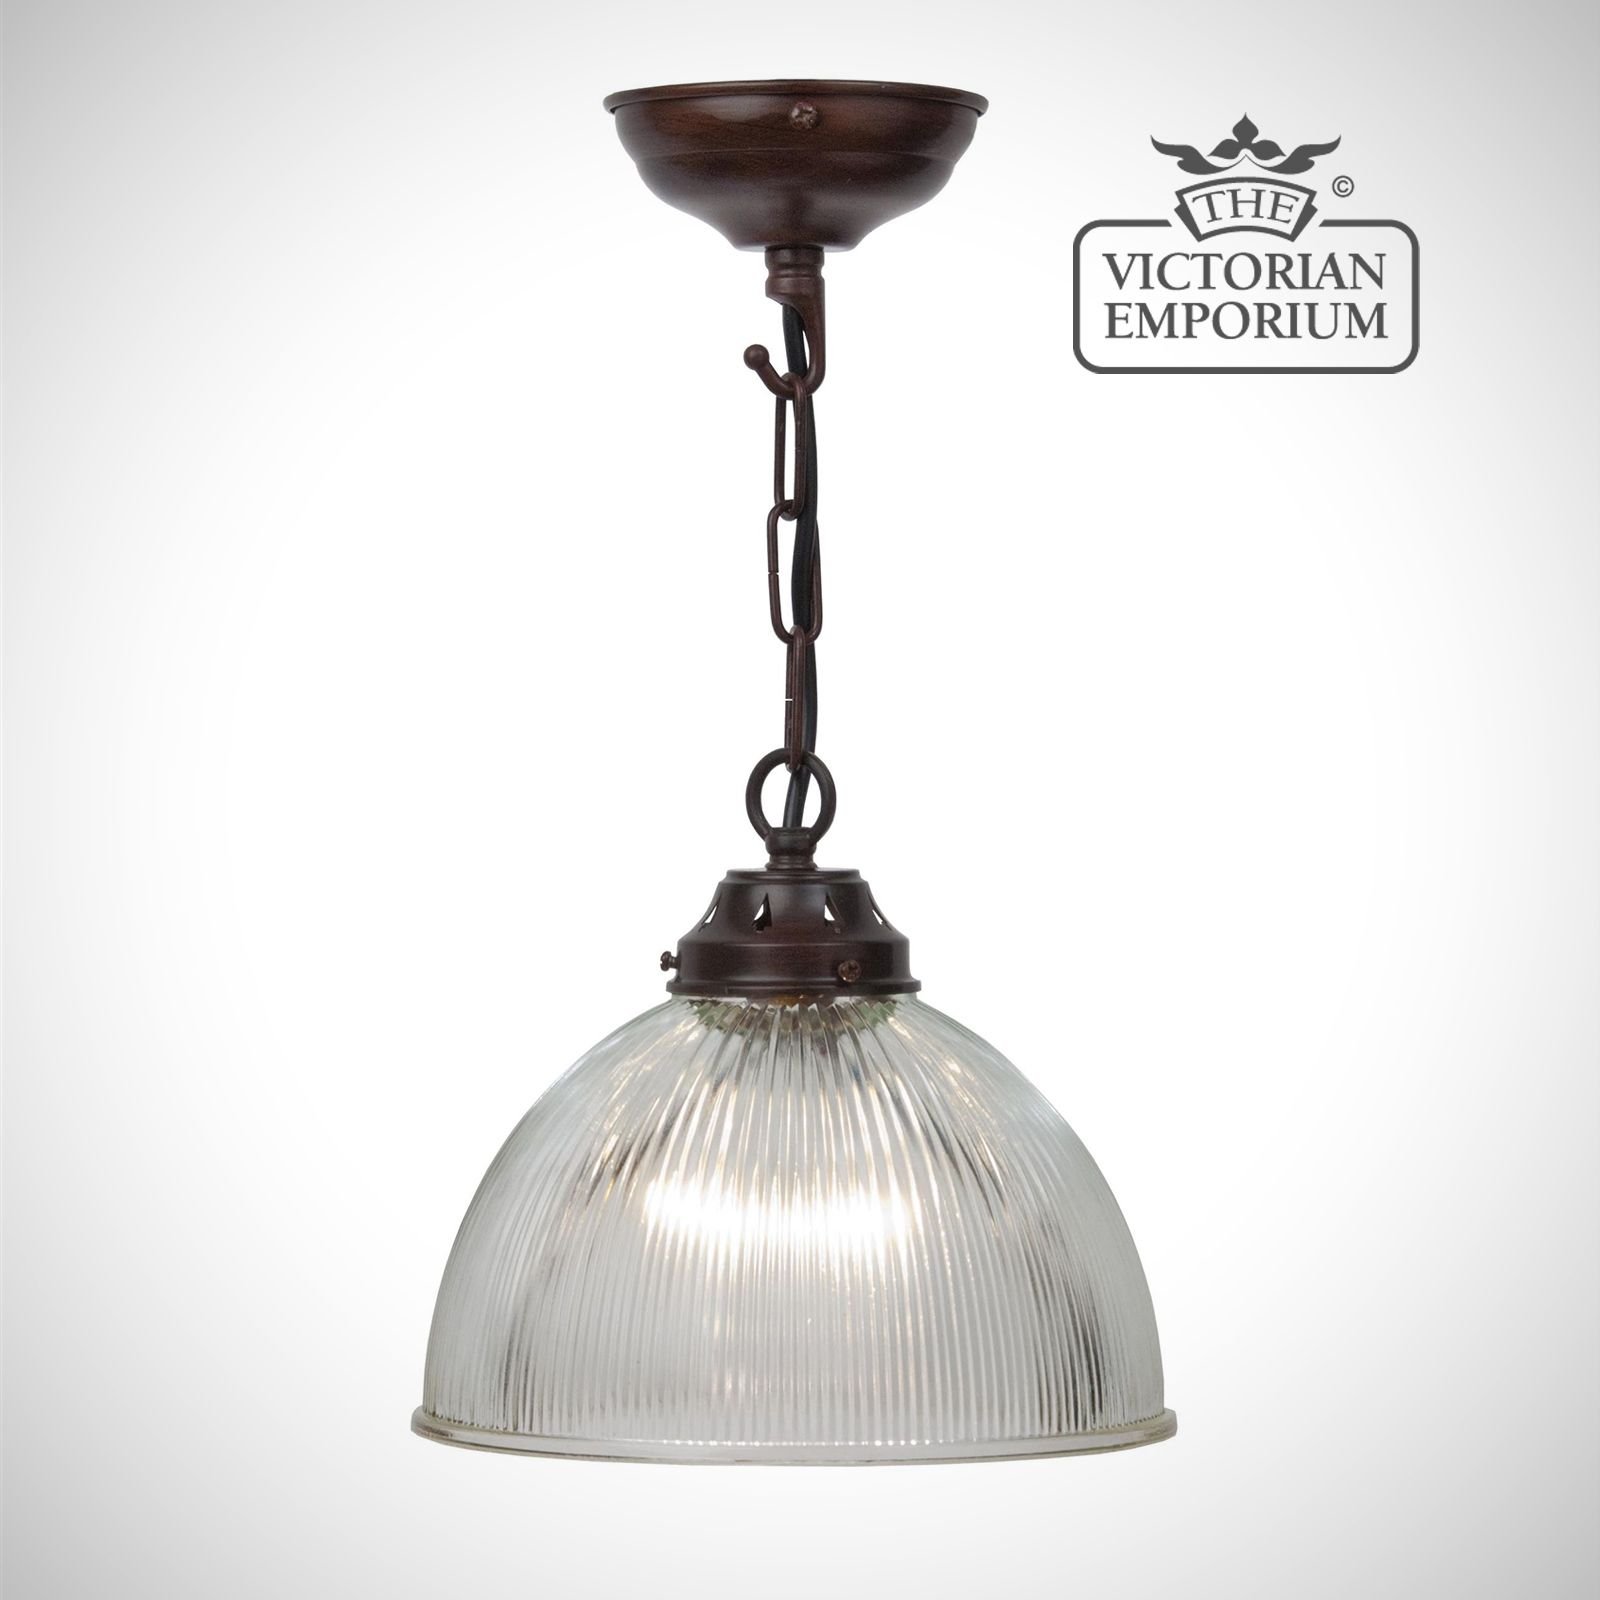 Simple dome ceiling light in antique bronze